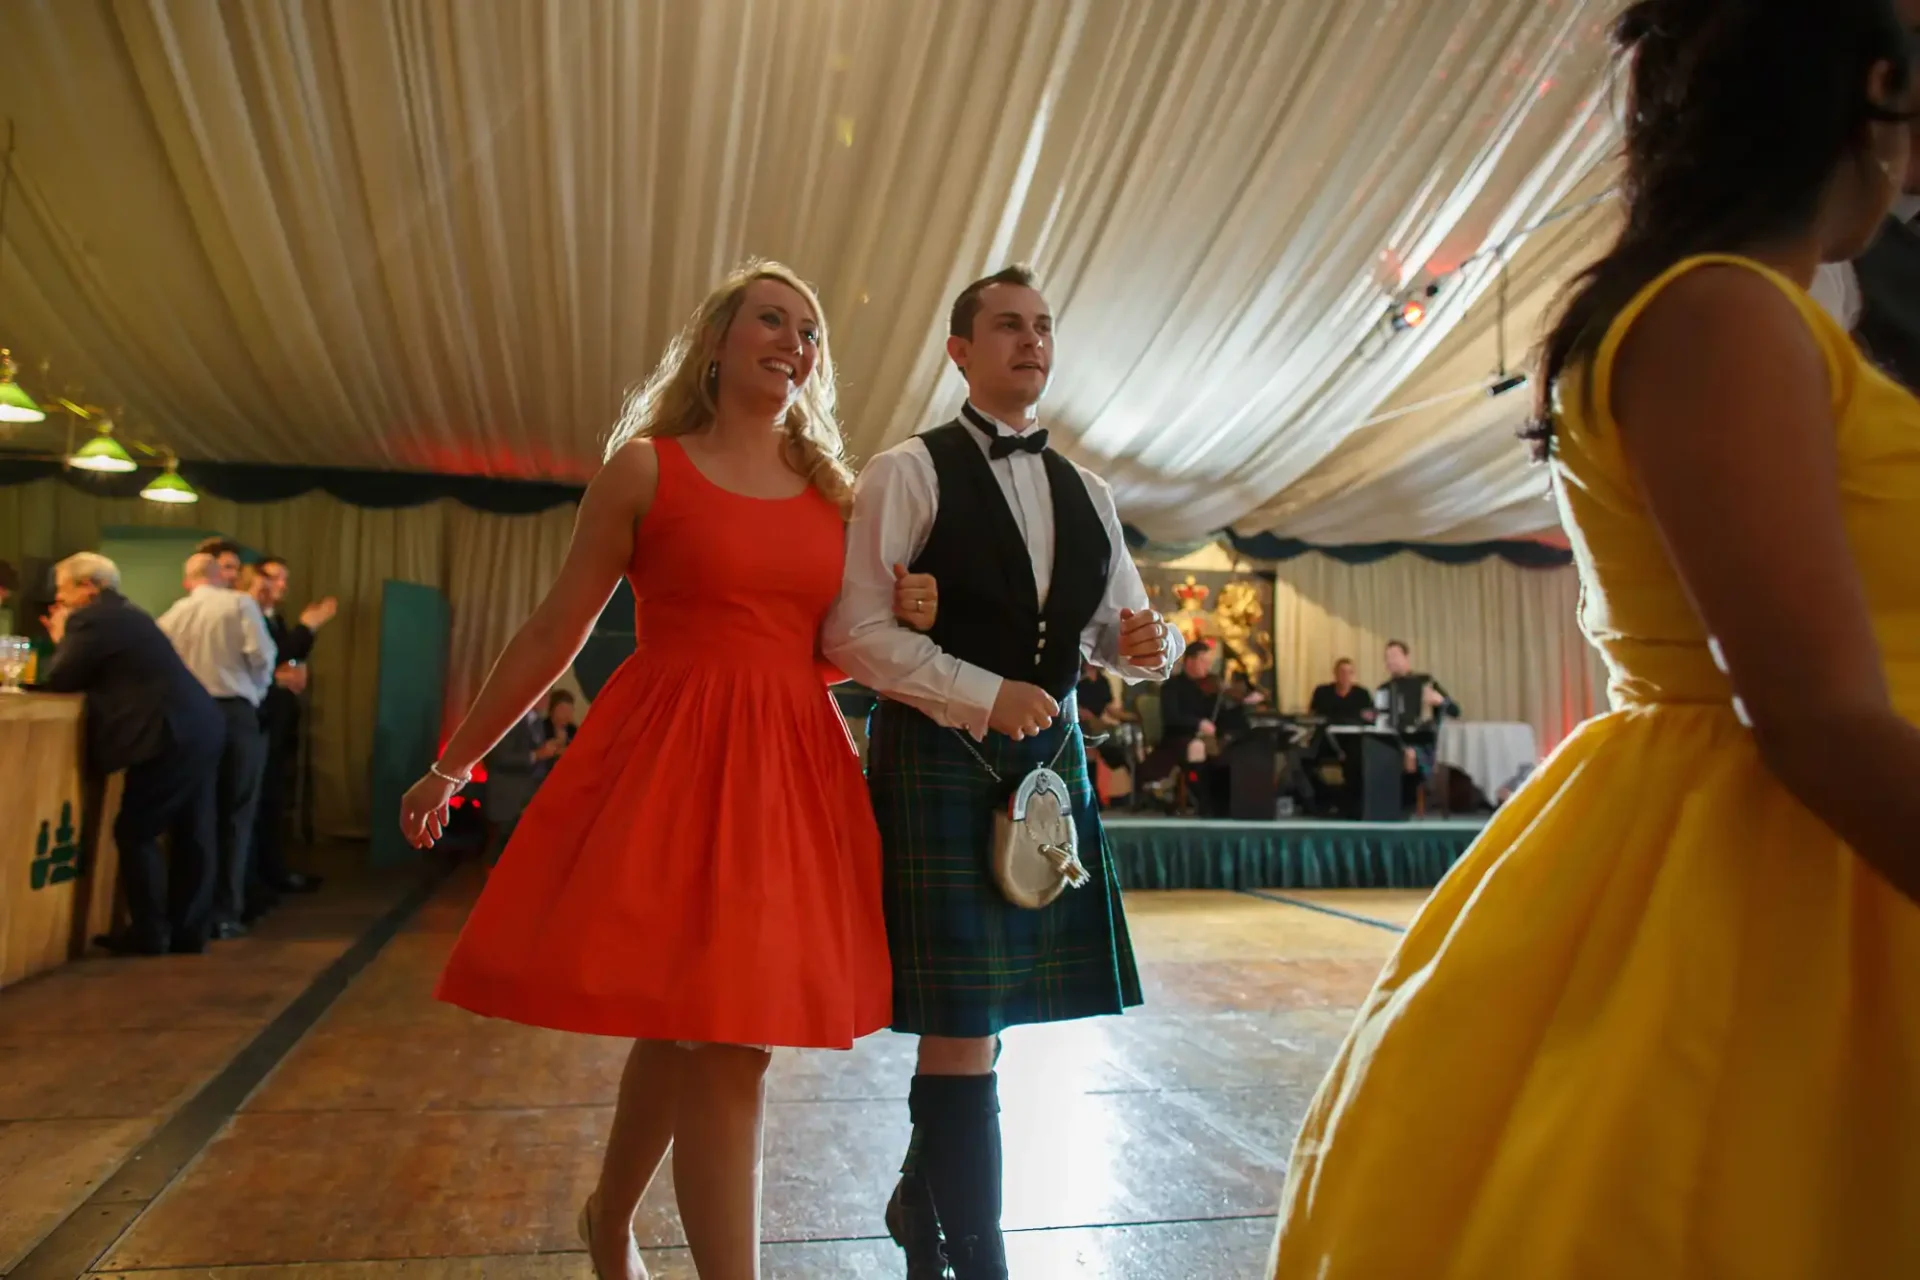 A man in a kilt and a woman in a red dress walking hand in hand at a festive event under a large tent.